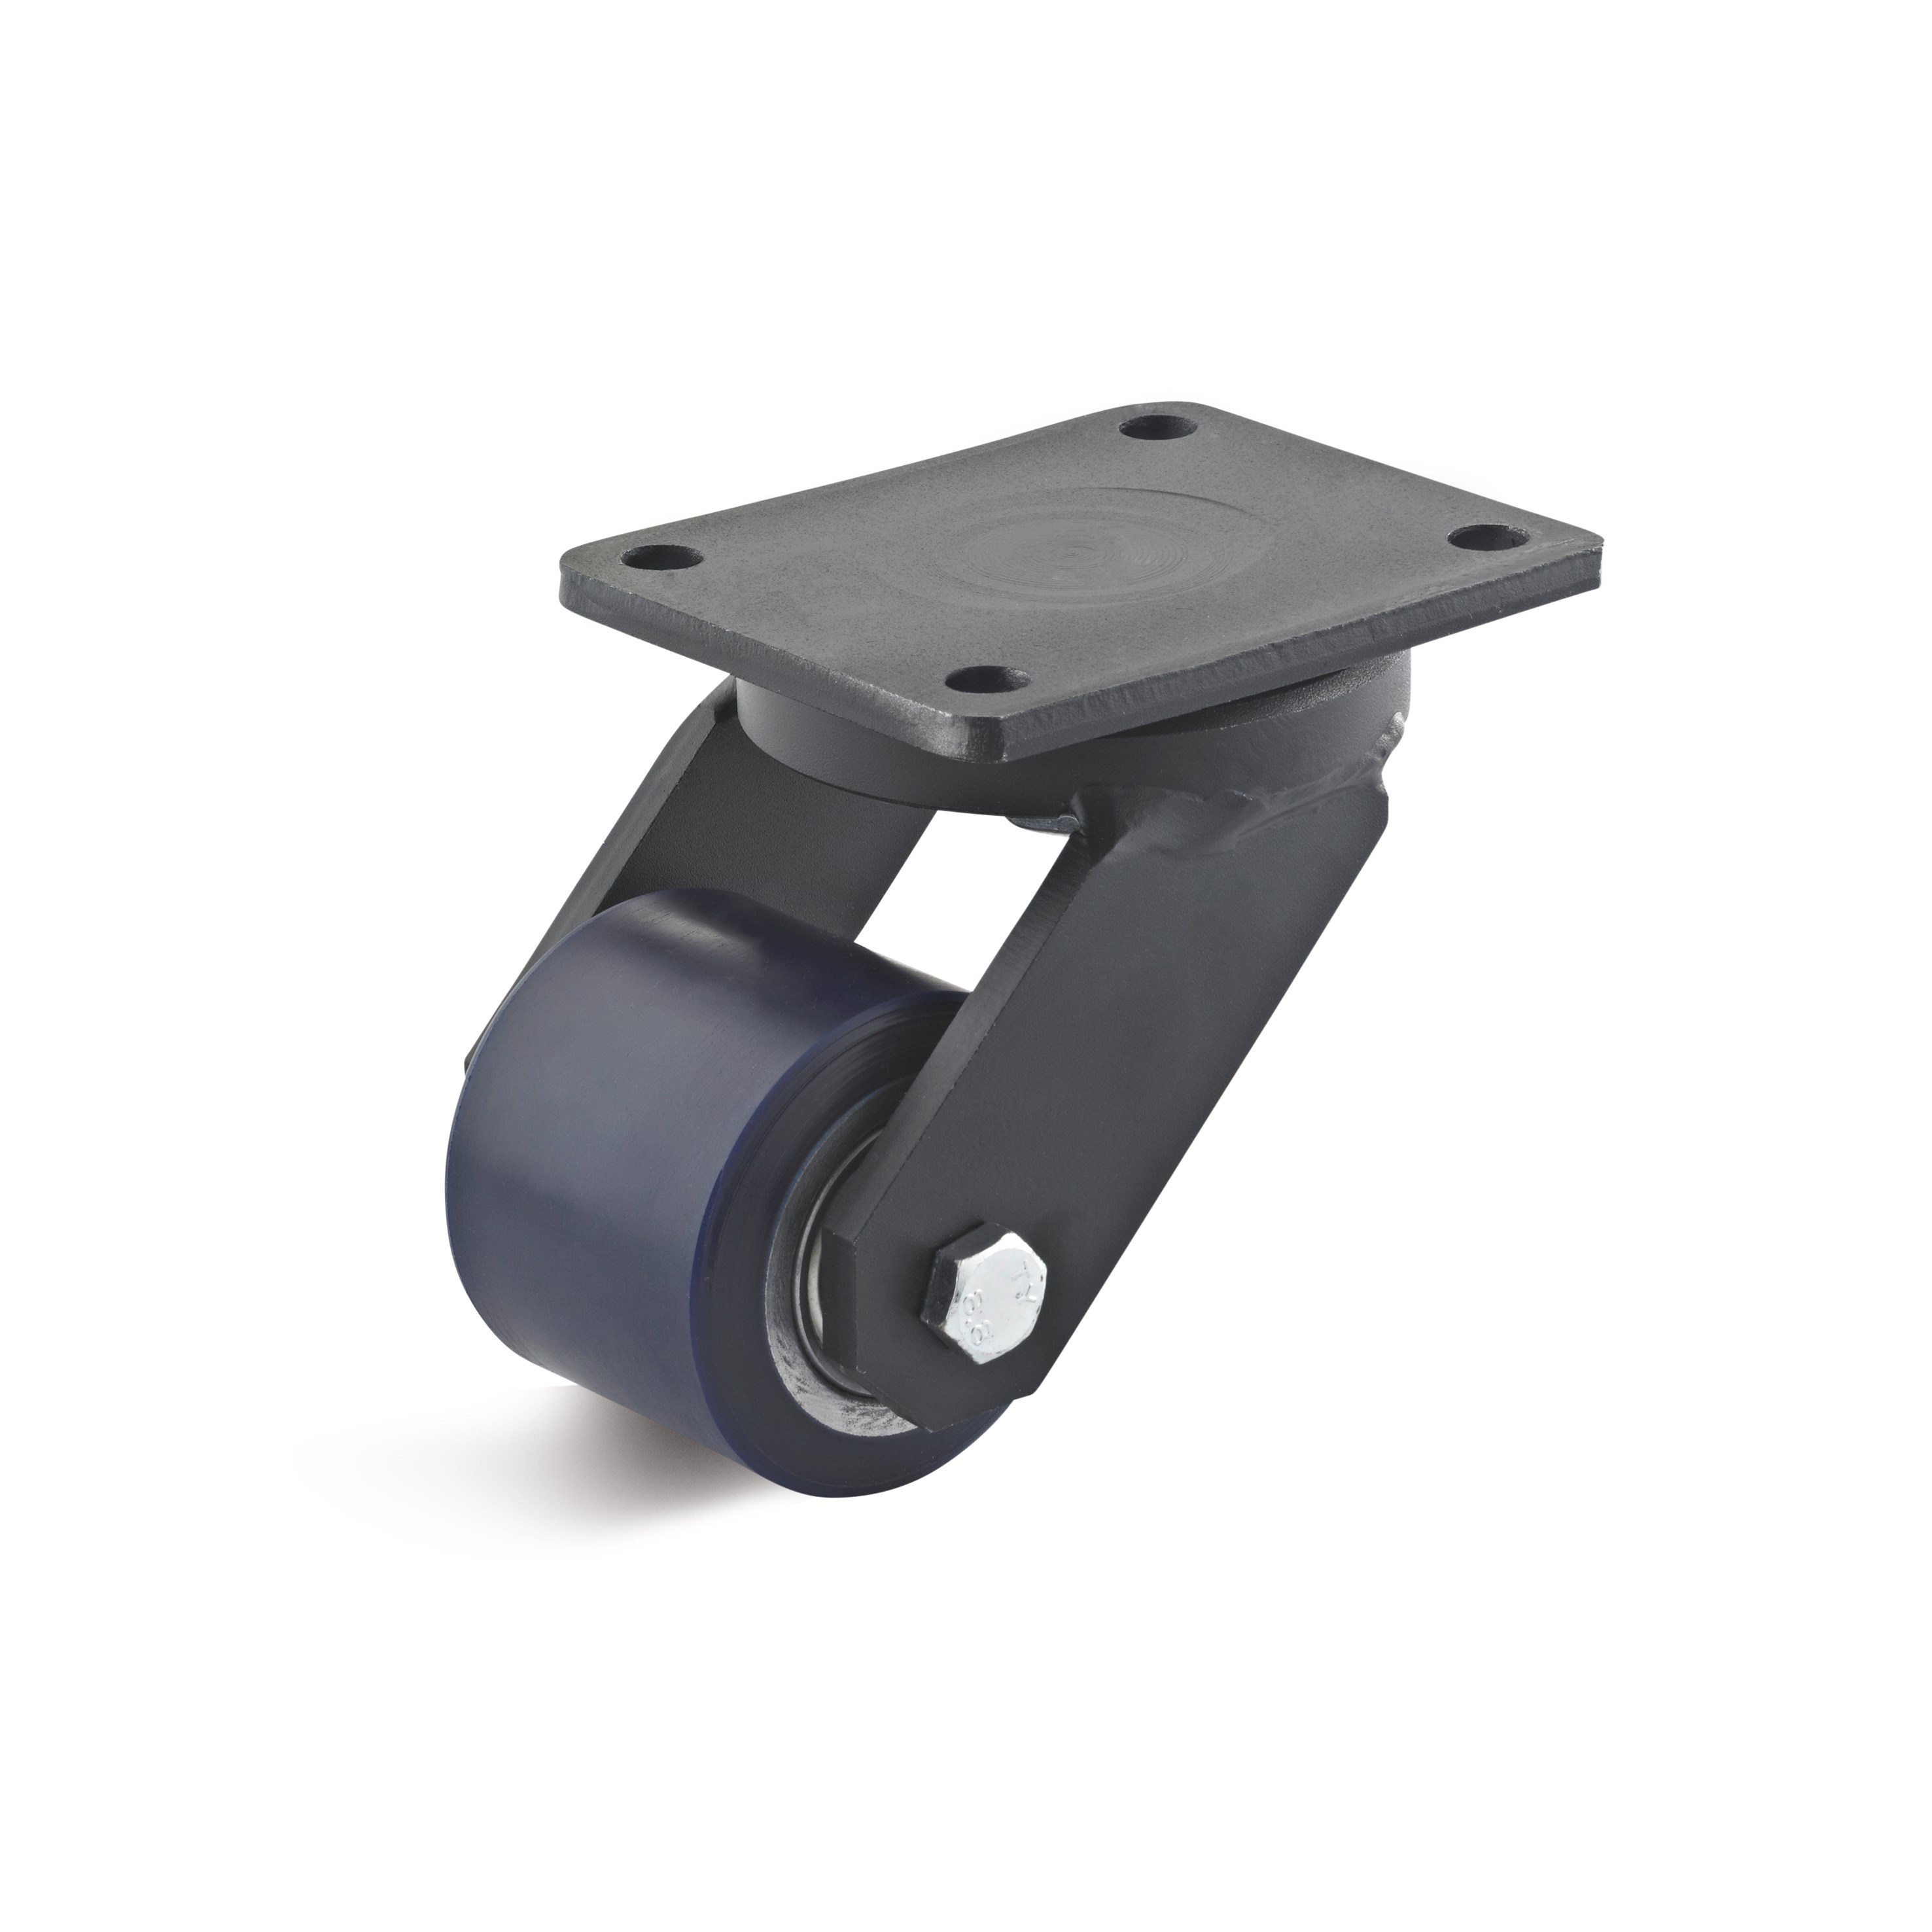 Swivel castor with high load capacity at low height